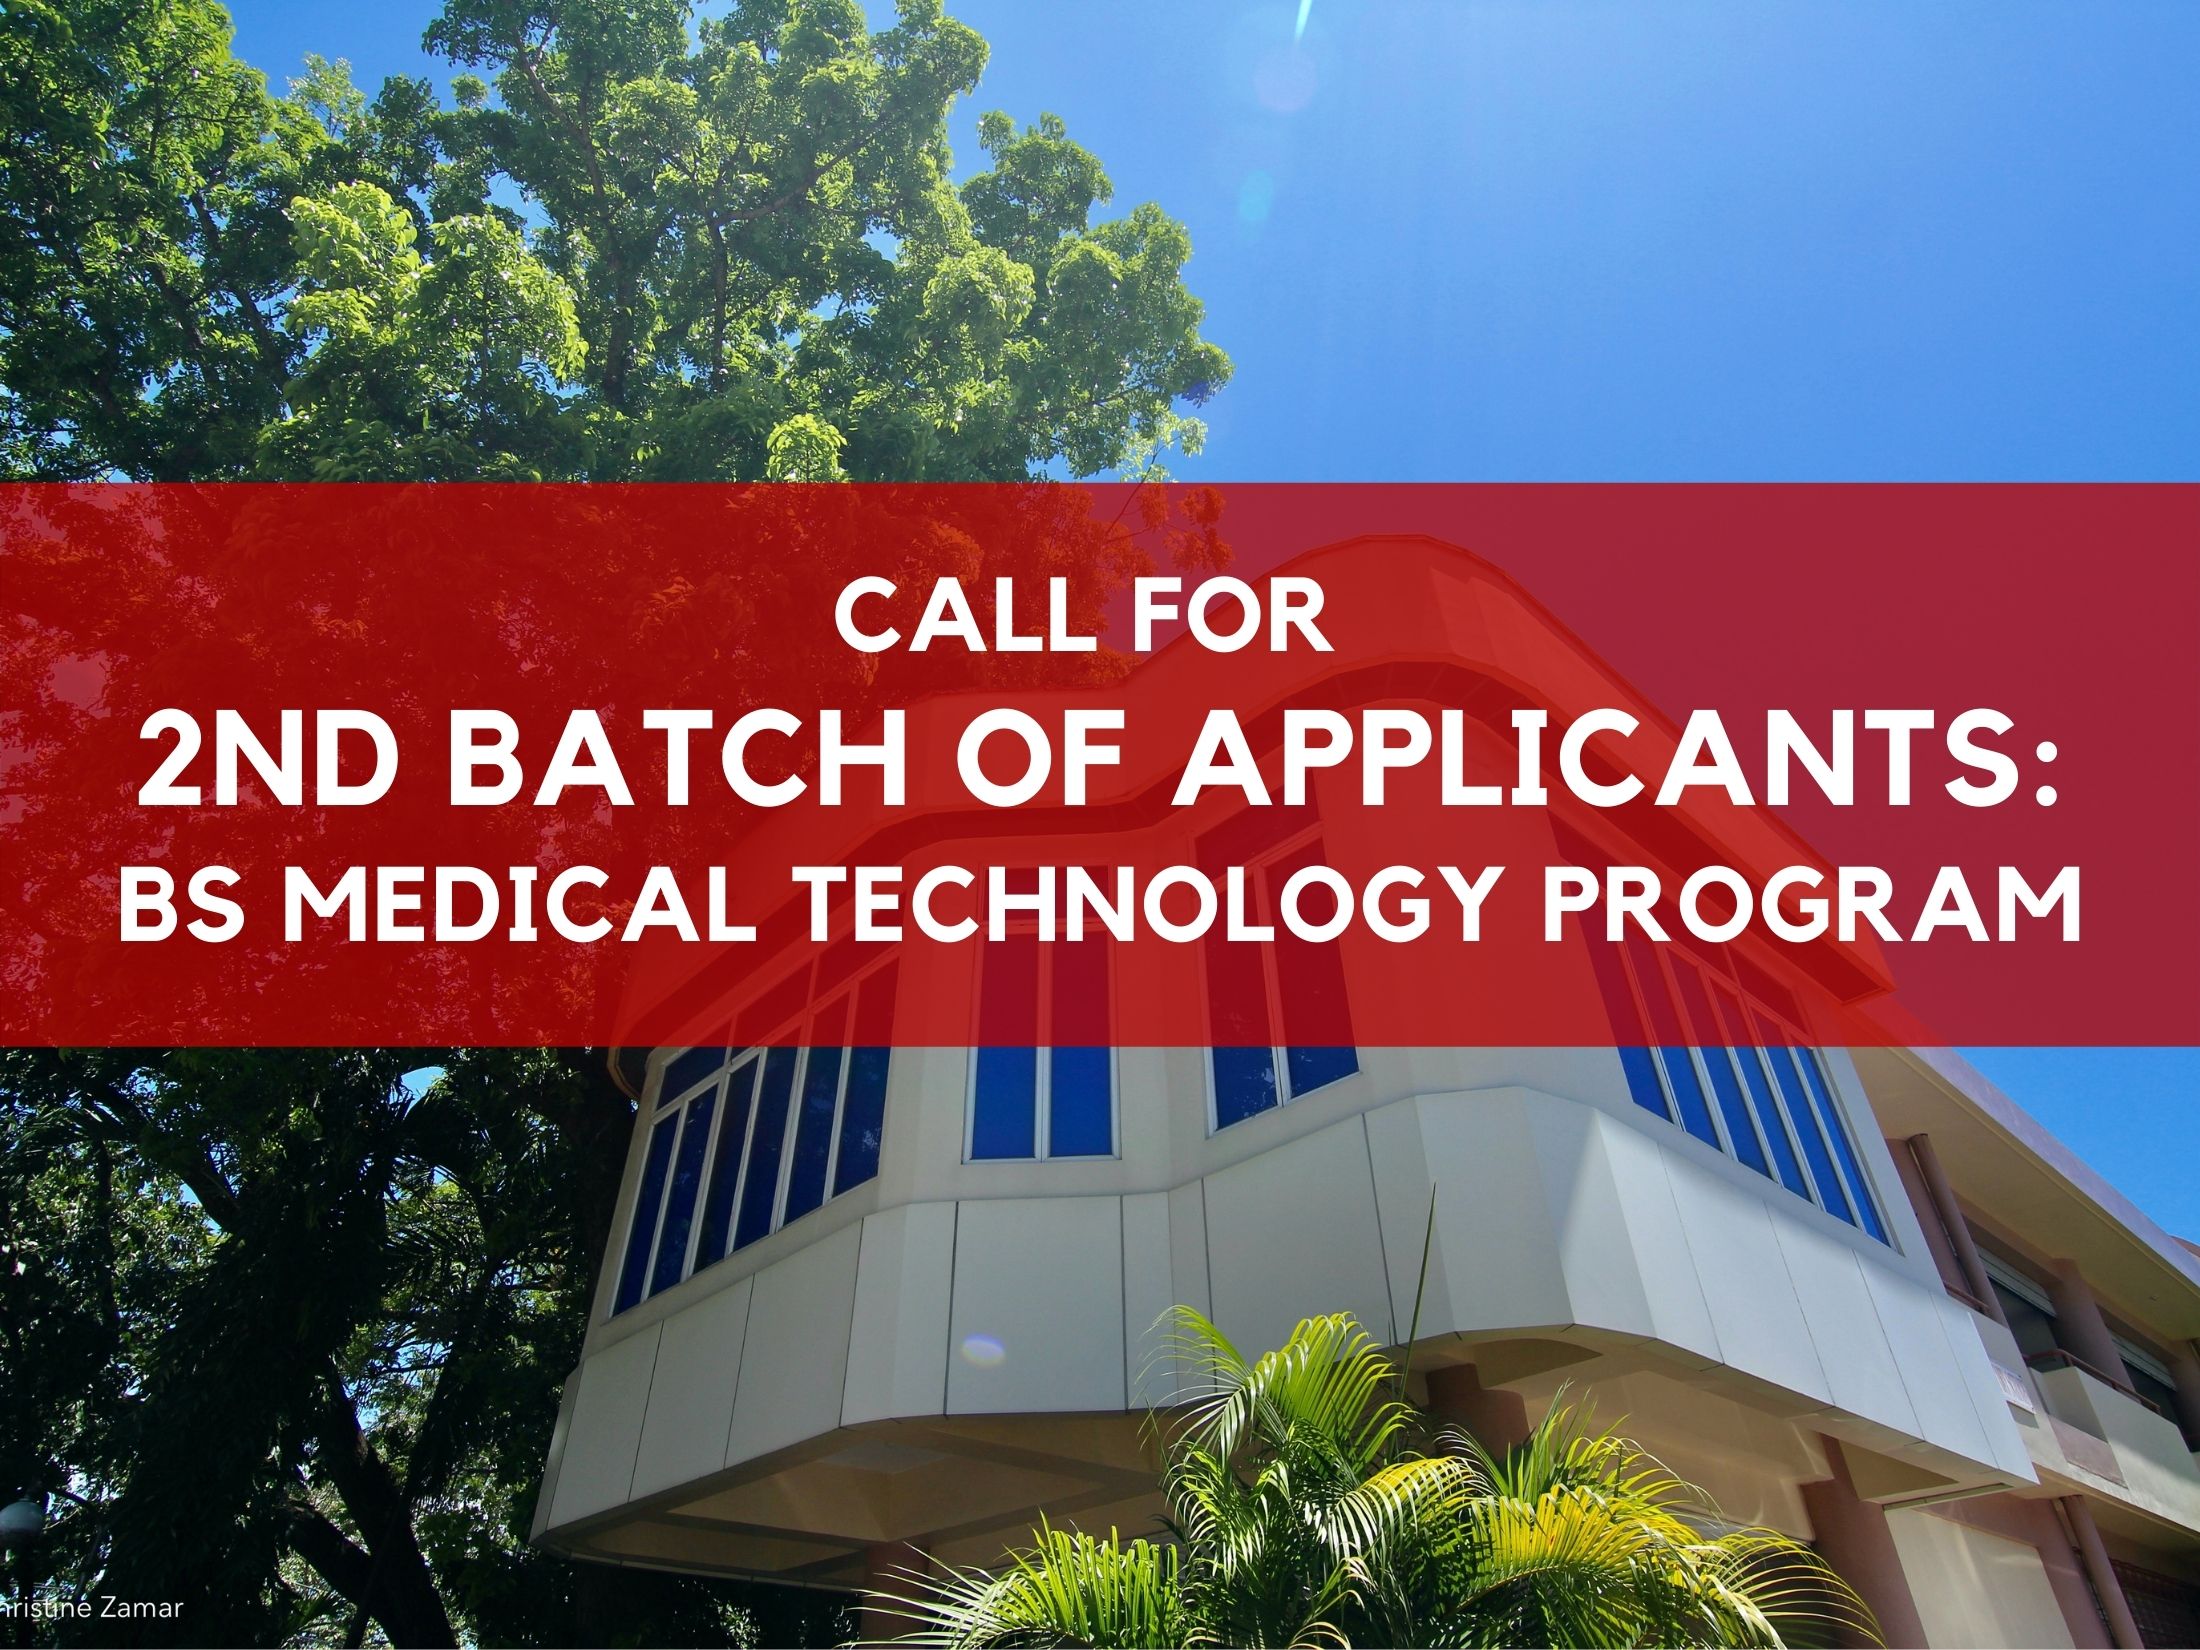 CALL FOR 2ND BATCH OF APPLICANTS: BS Medical Technology Program